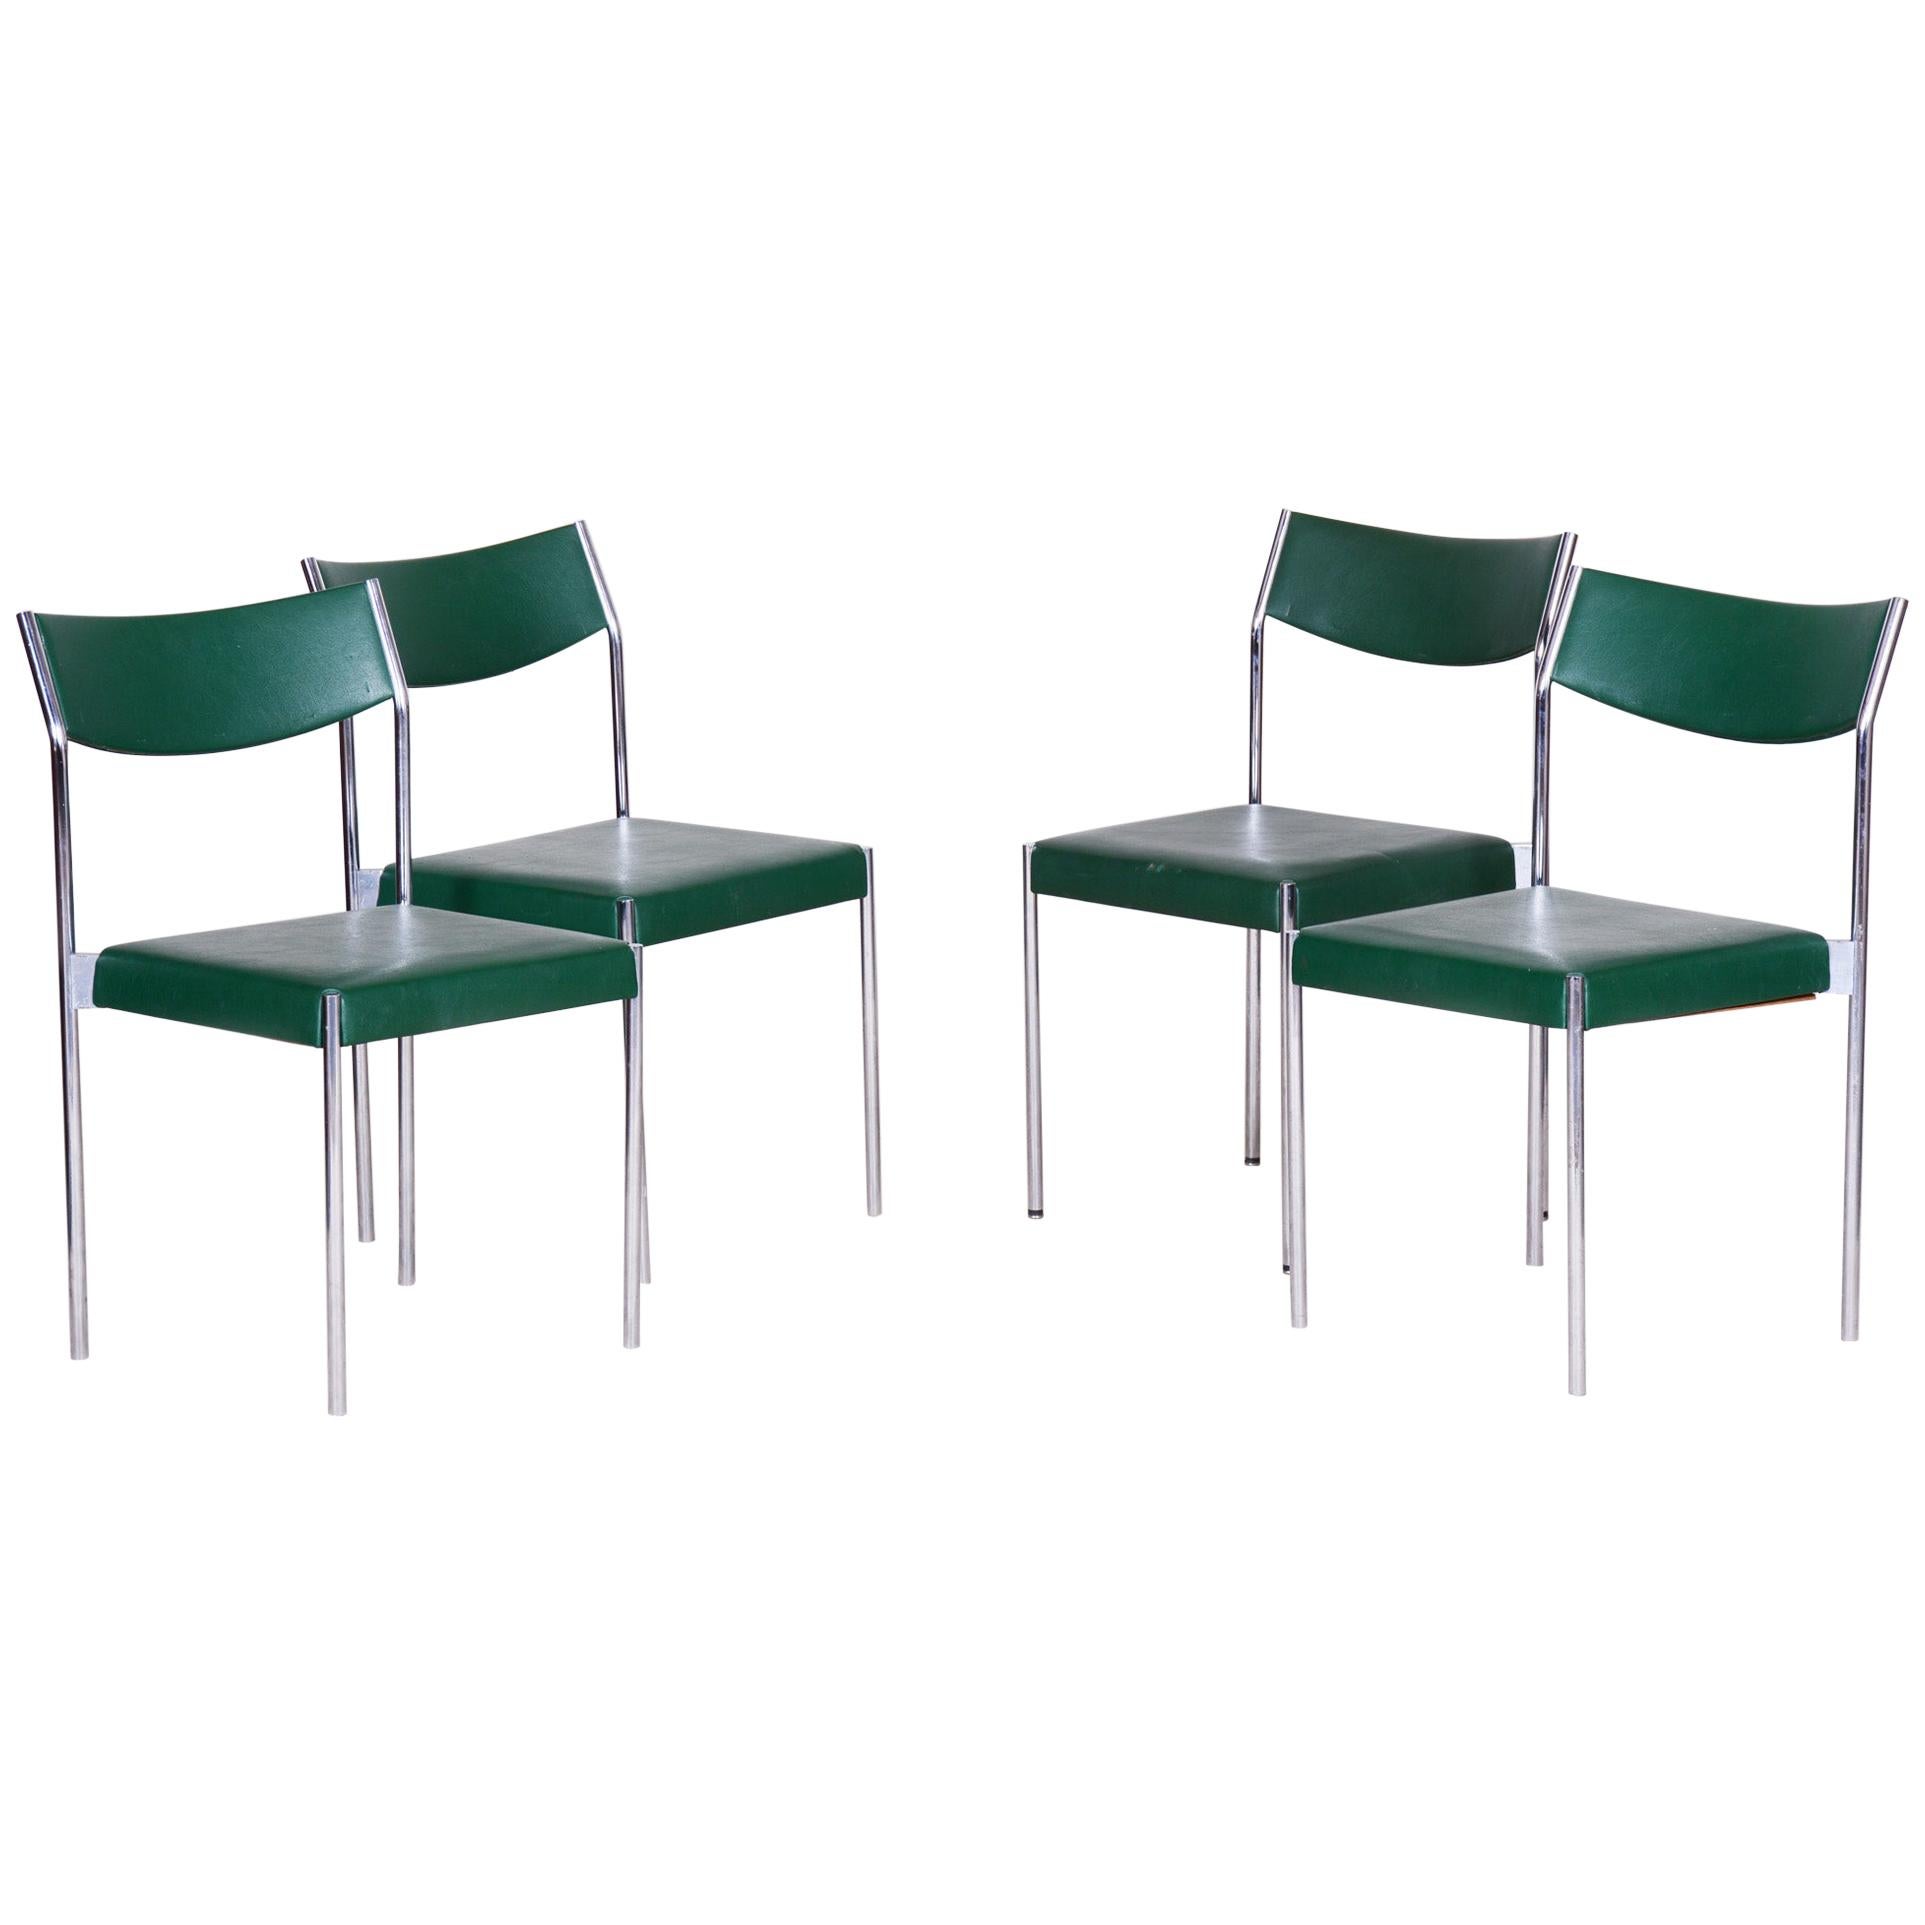 Leatherette Chrome Midcentury Chairs, 4 Pieces, 1950s, Well Preserved Condition